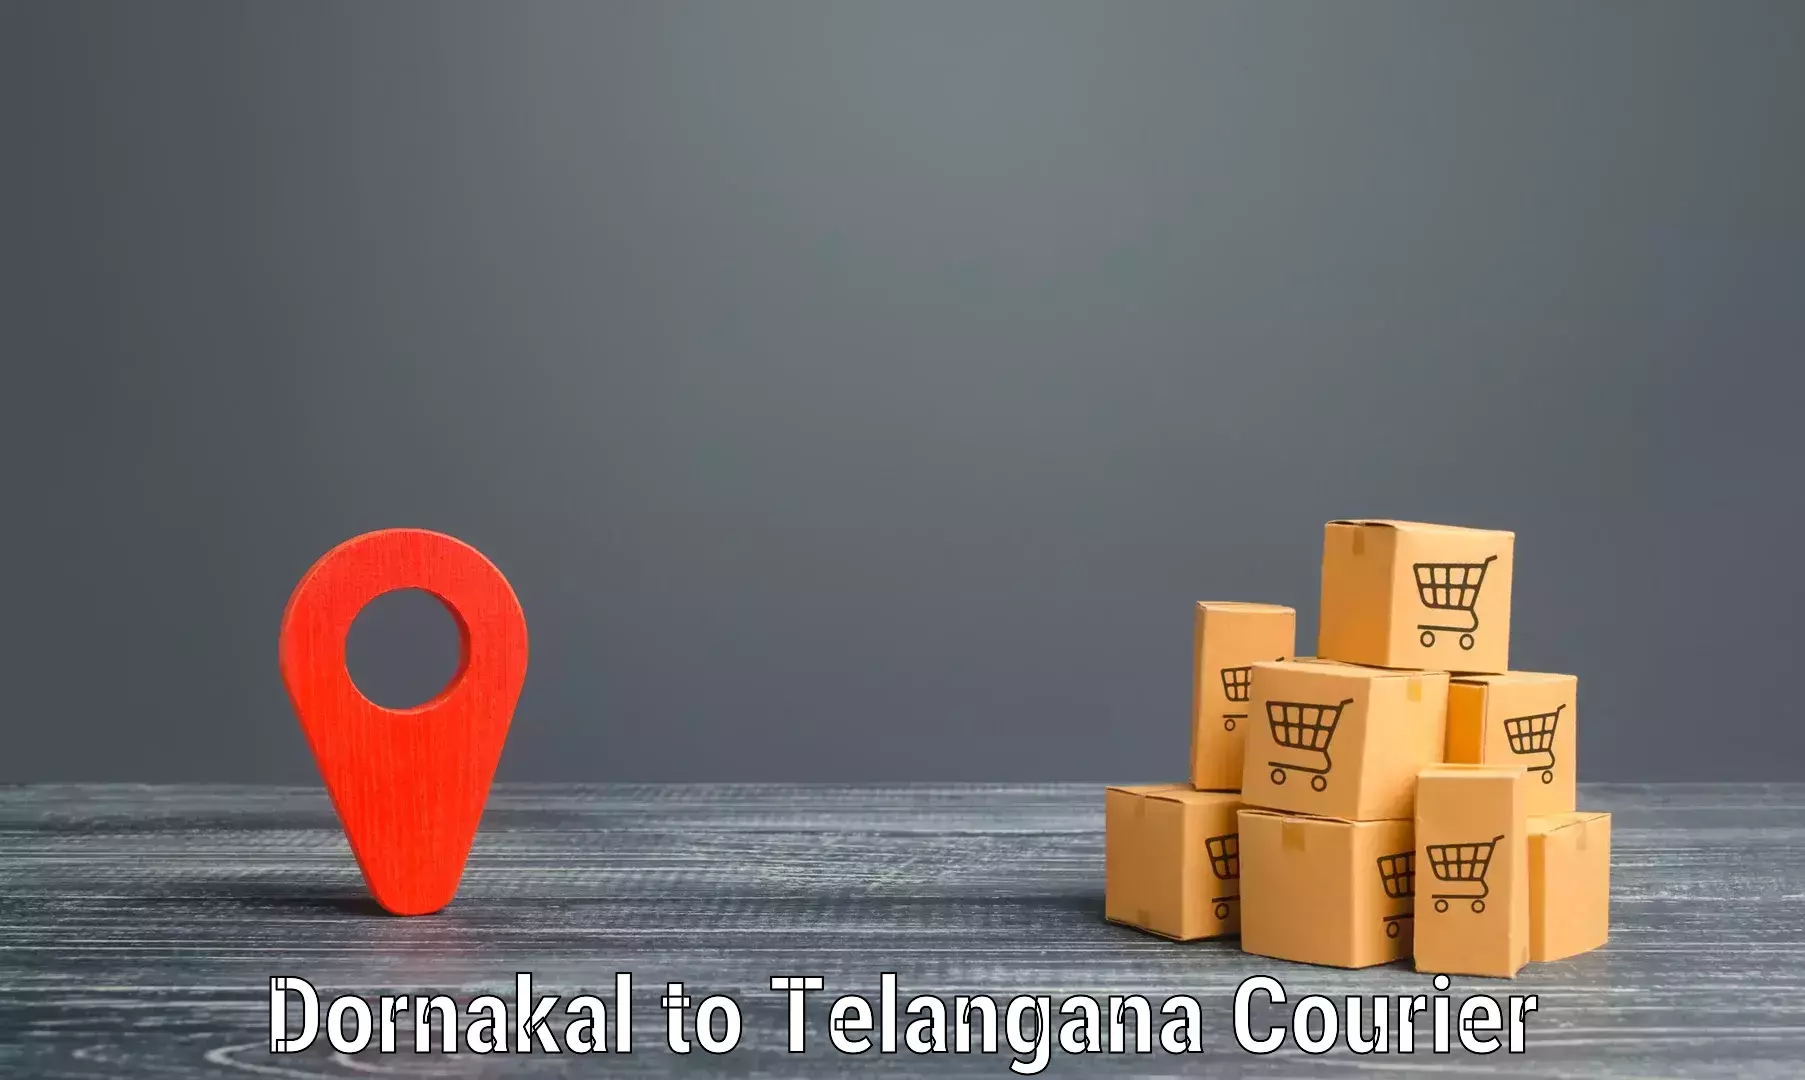 Express package handling in Dornakal to Gollapalli